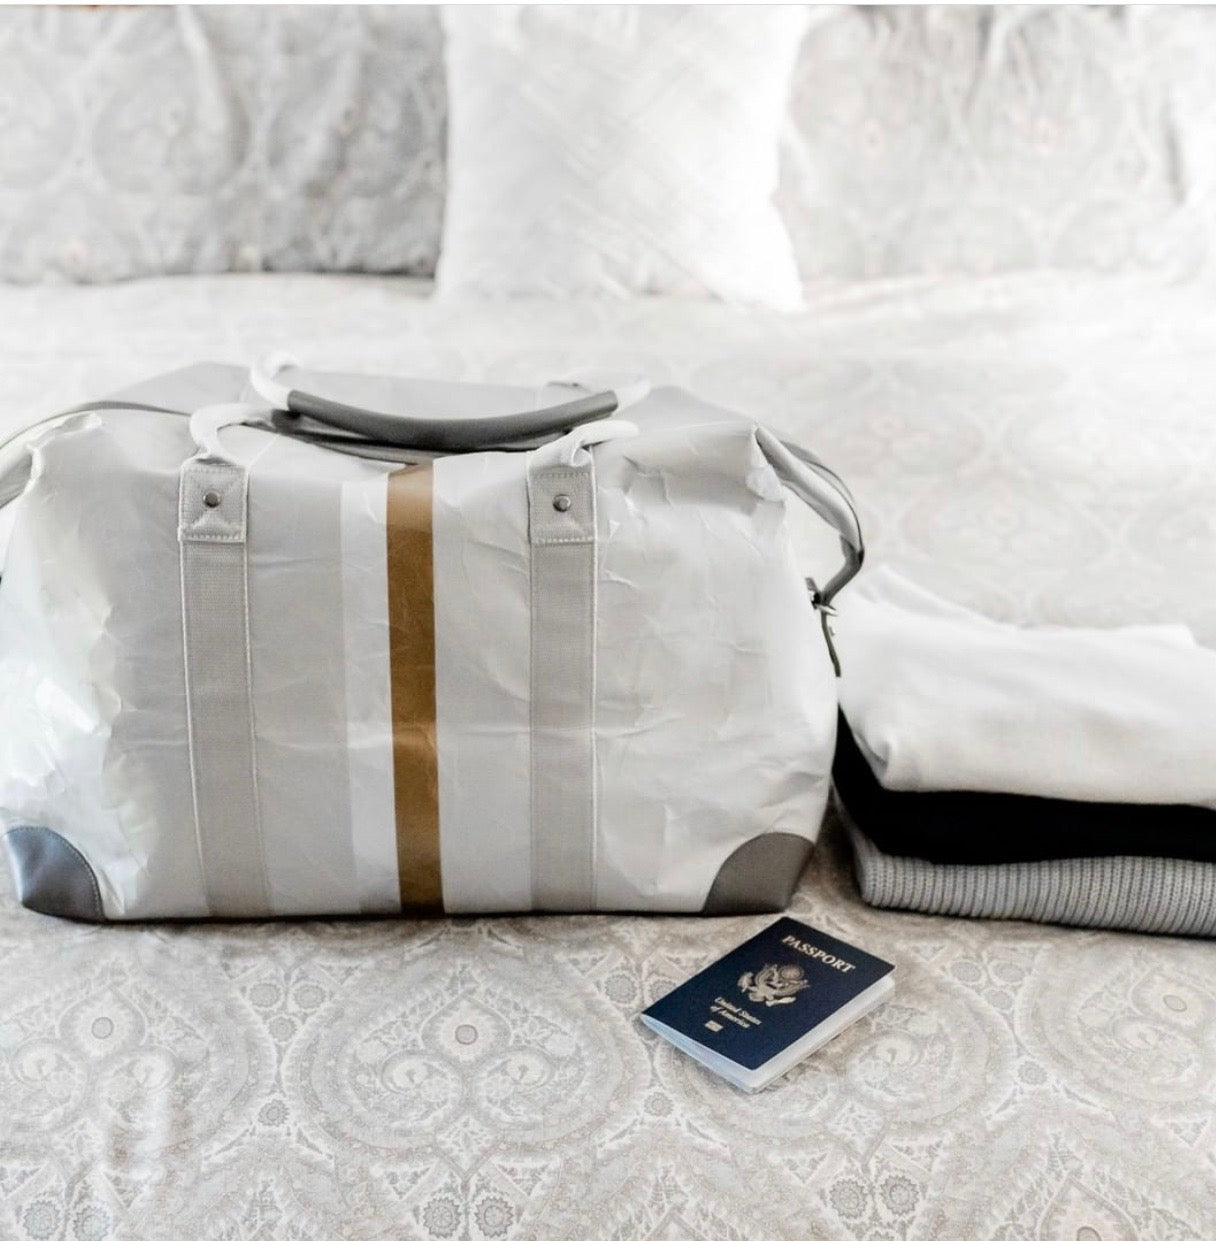 The Weekender Travel Carry On Bag in Black with Silver and Gold Stripes